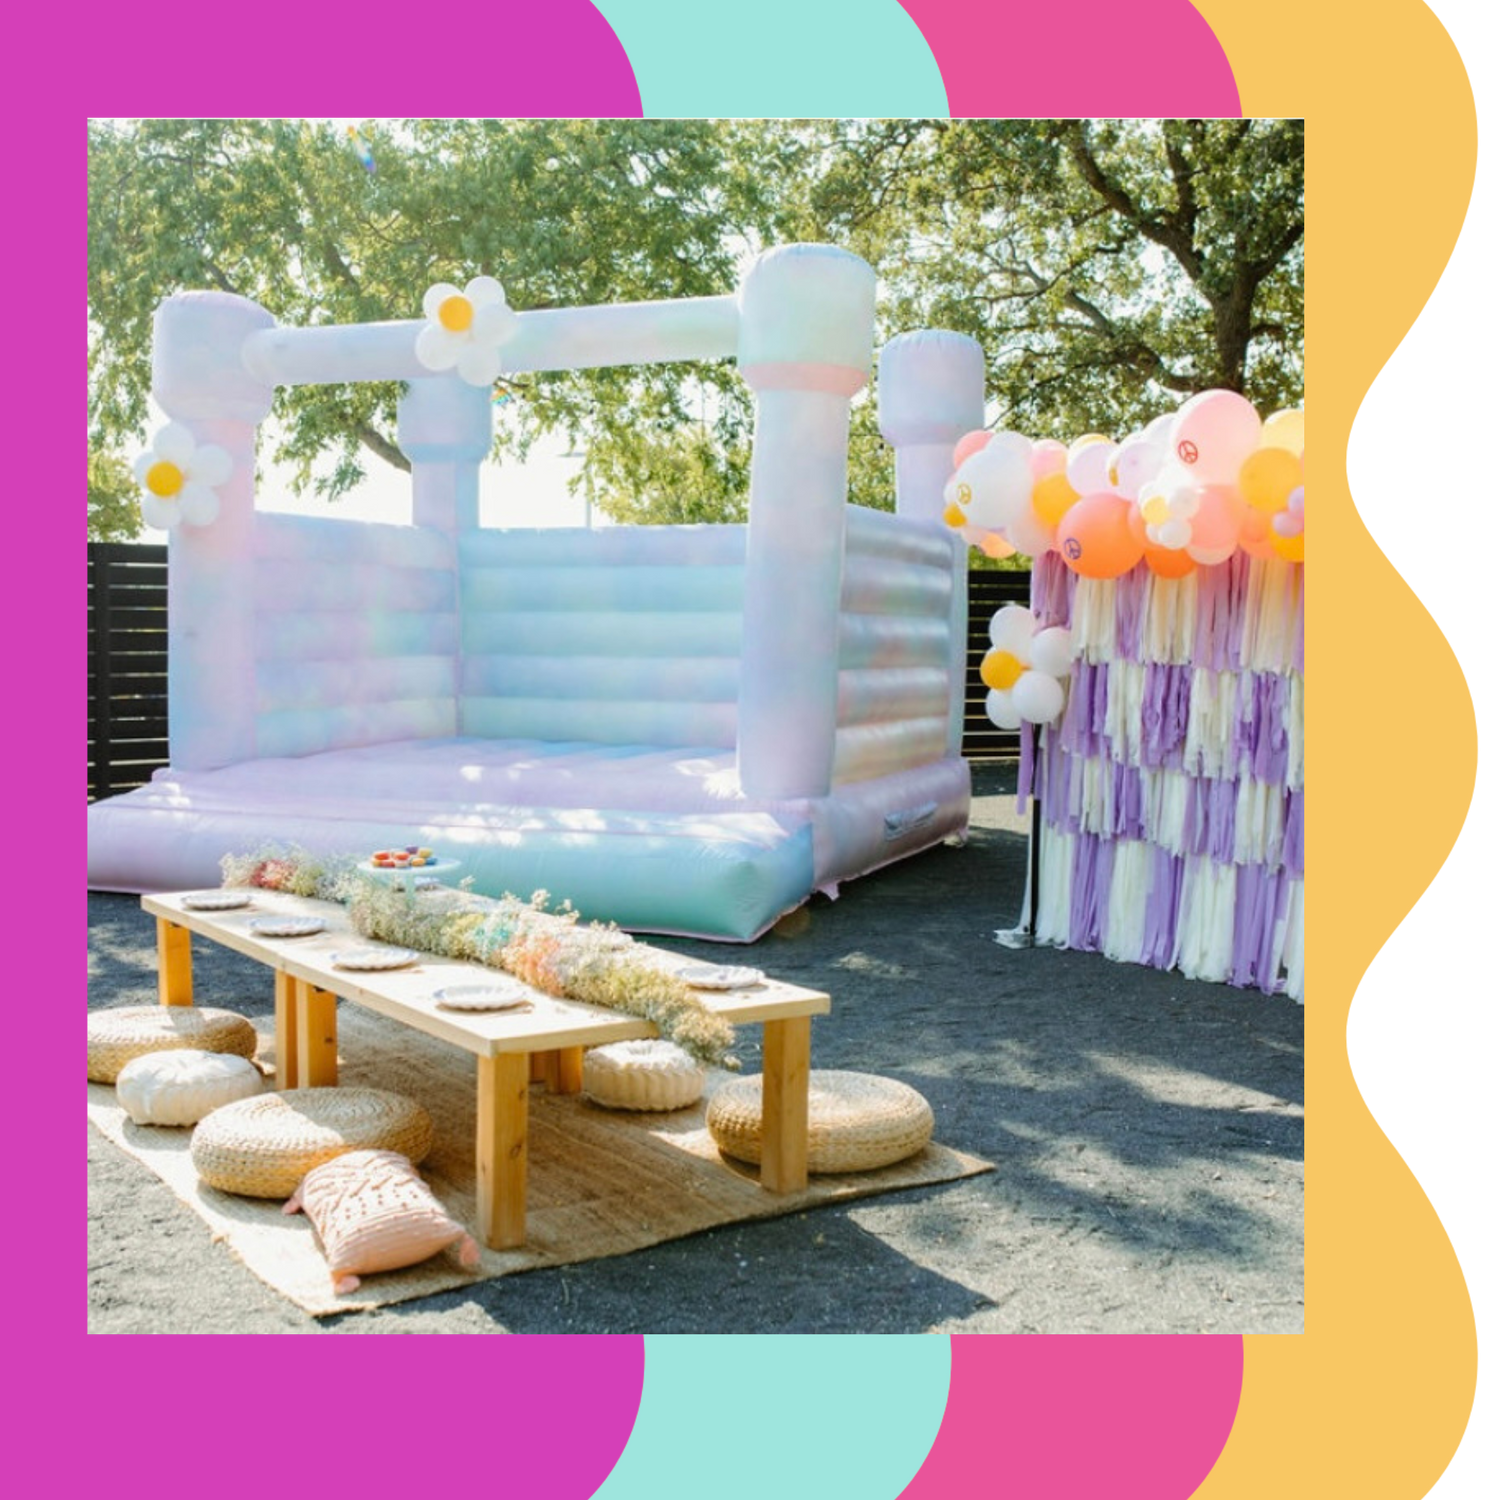 DFW Bounce Houses. Pink bounce house, black bounce house, adult bounce houses, bounce house with slides, water slide bounce house, bubble house, bubble house rental